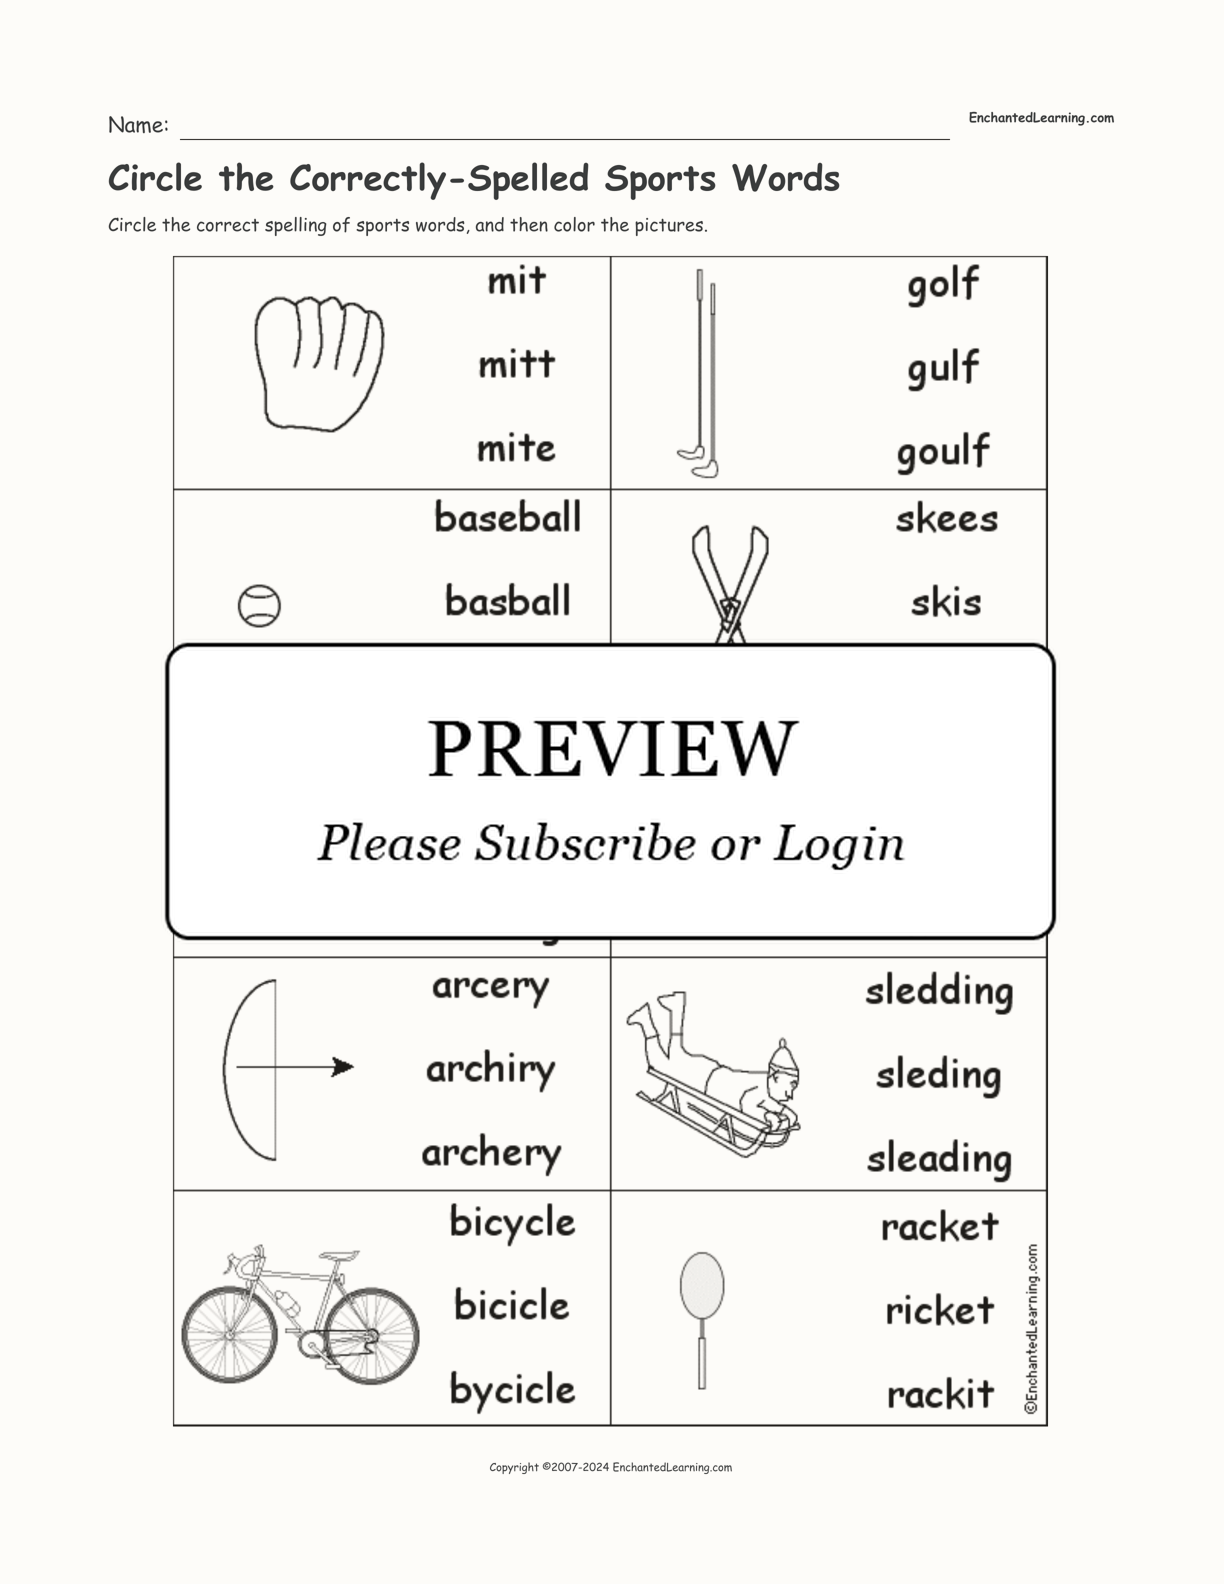 Circle the Correctly-Spelled Sports Words interactive worksheet page 1